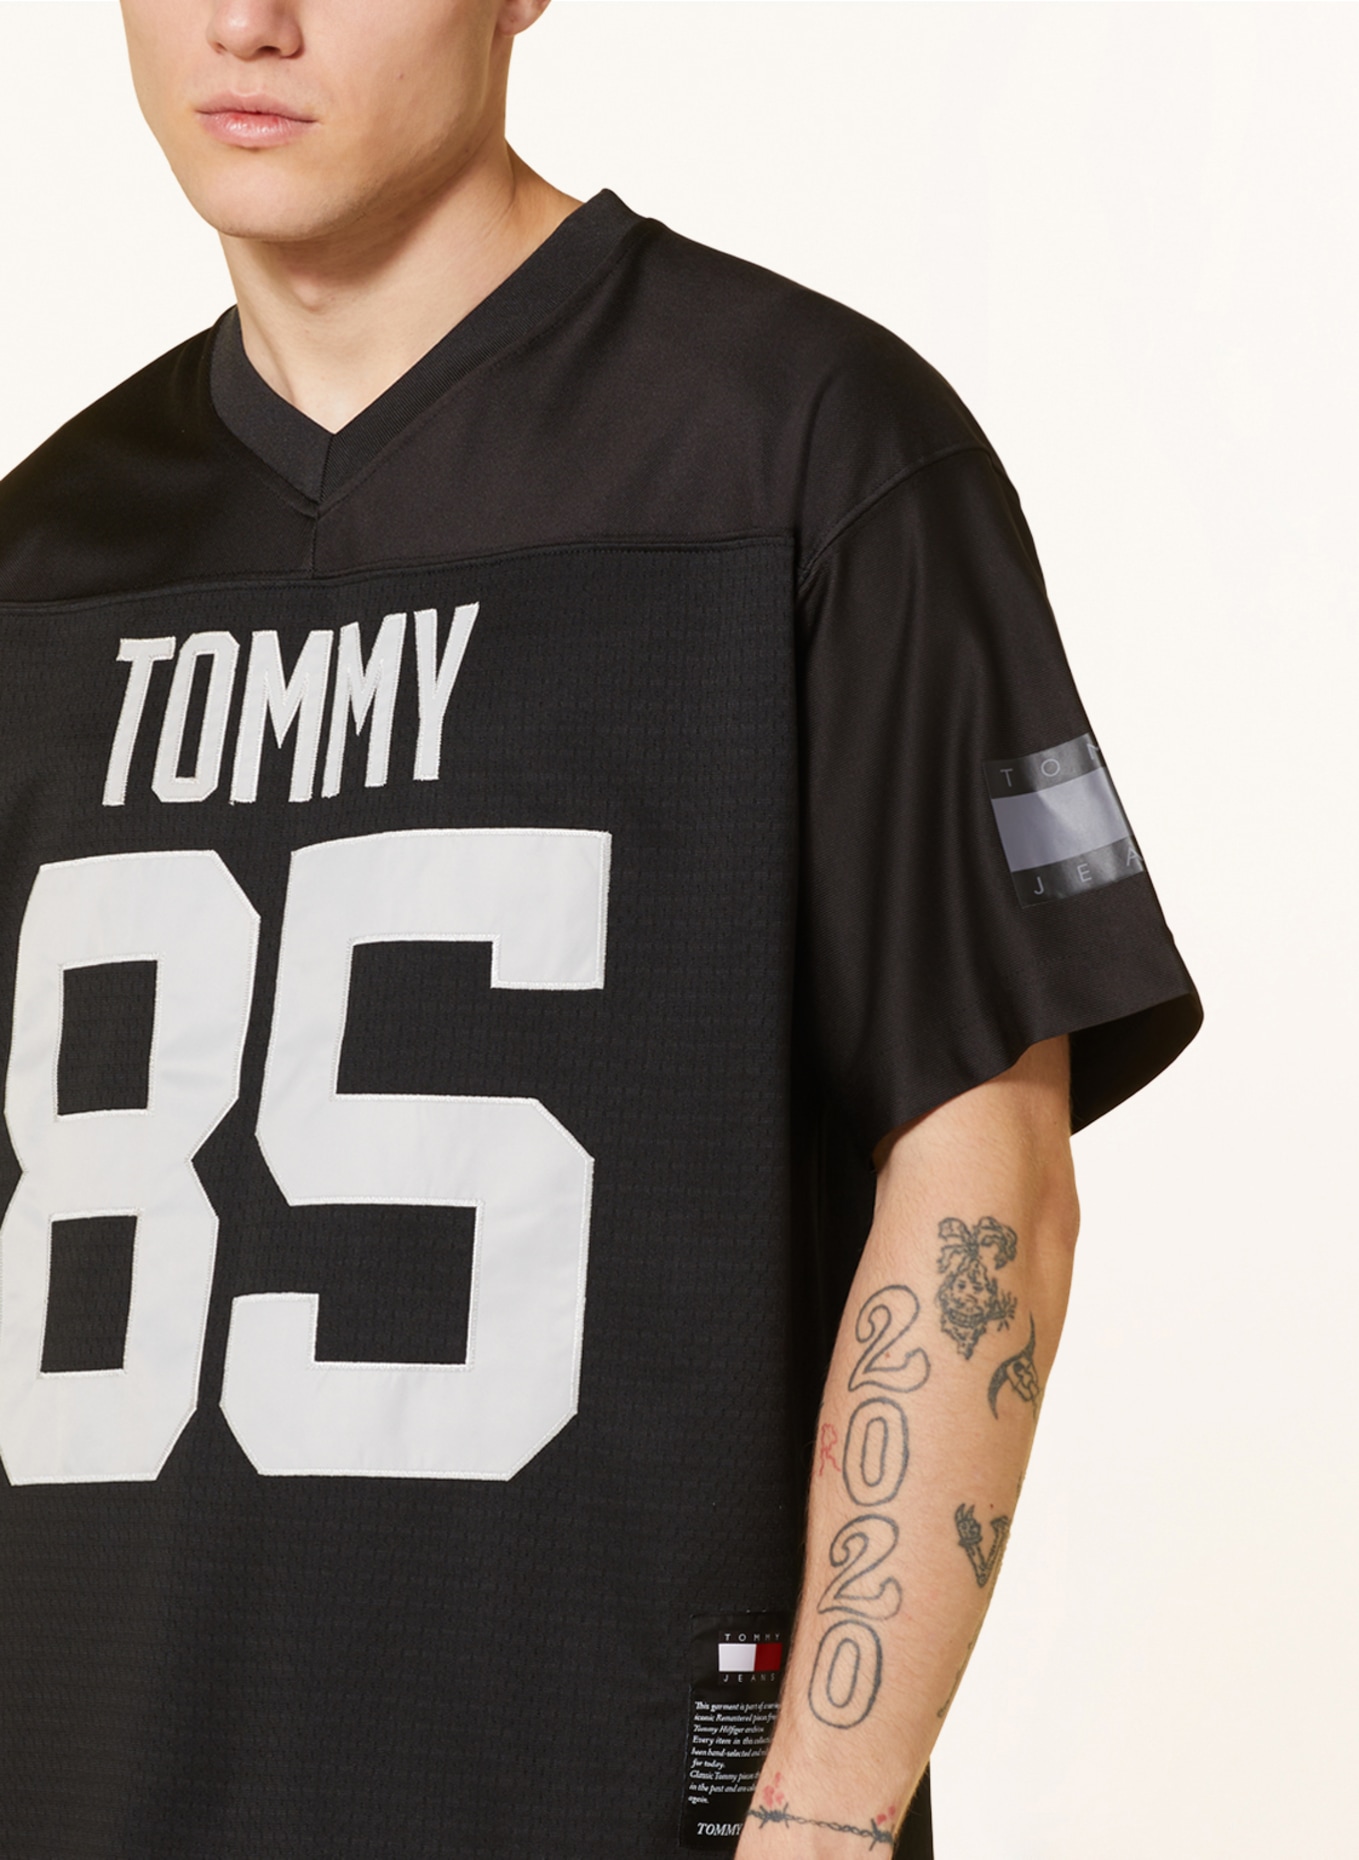 TOMMY JEANS gray T-shirt mesh in made of black